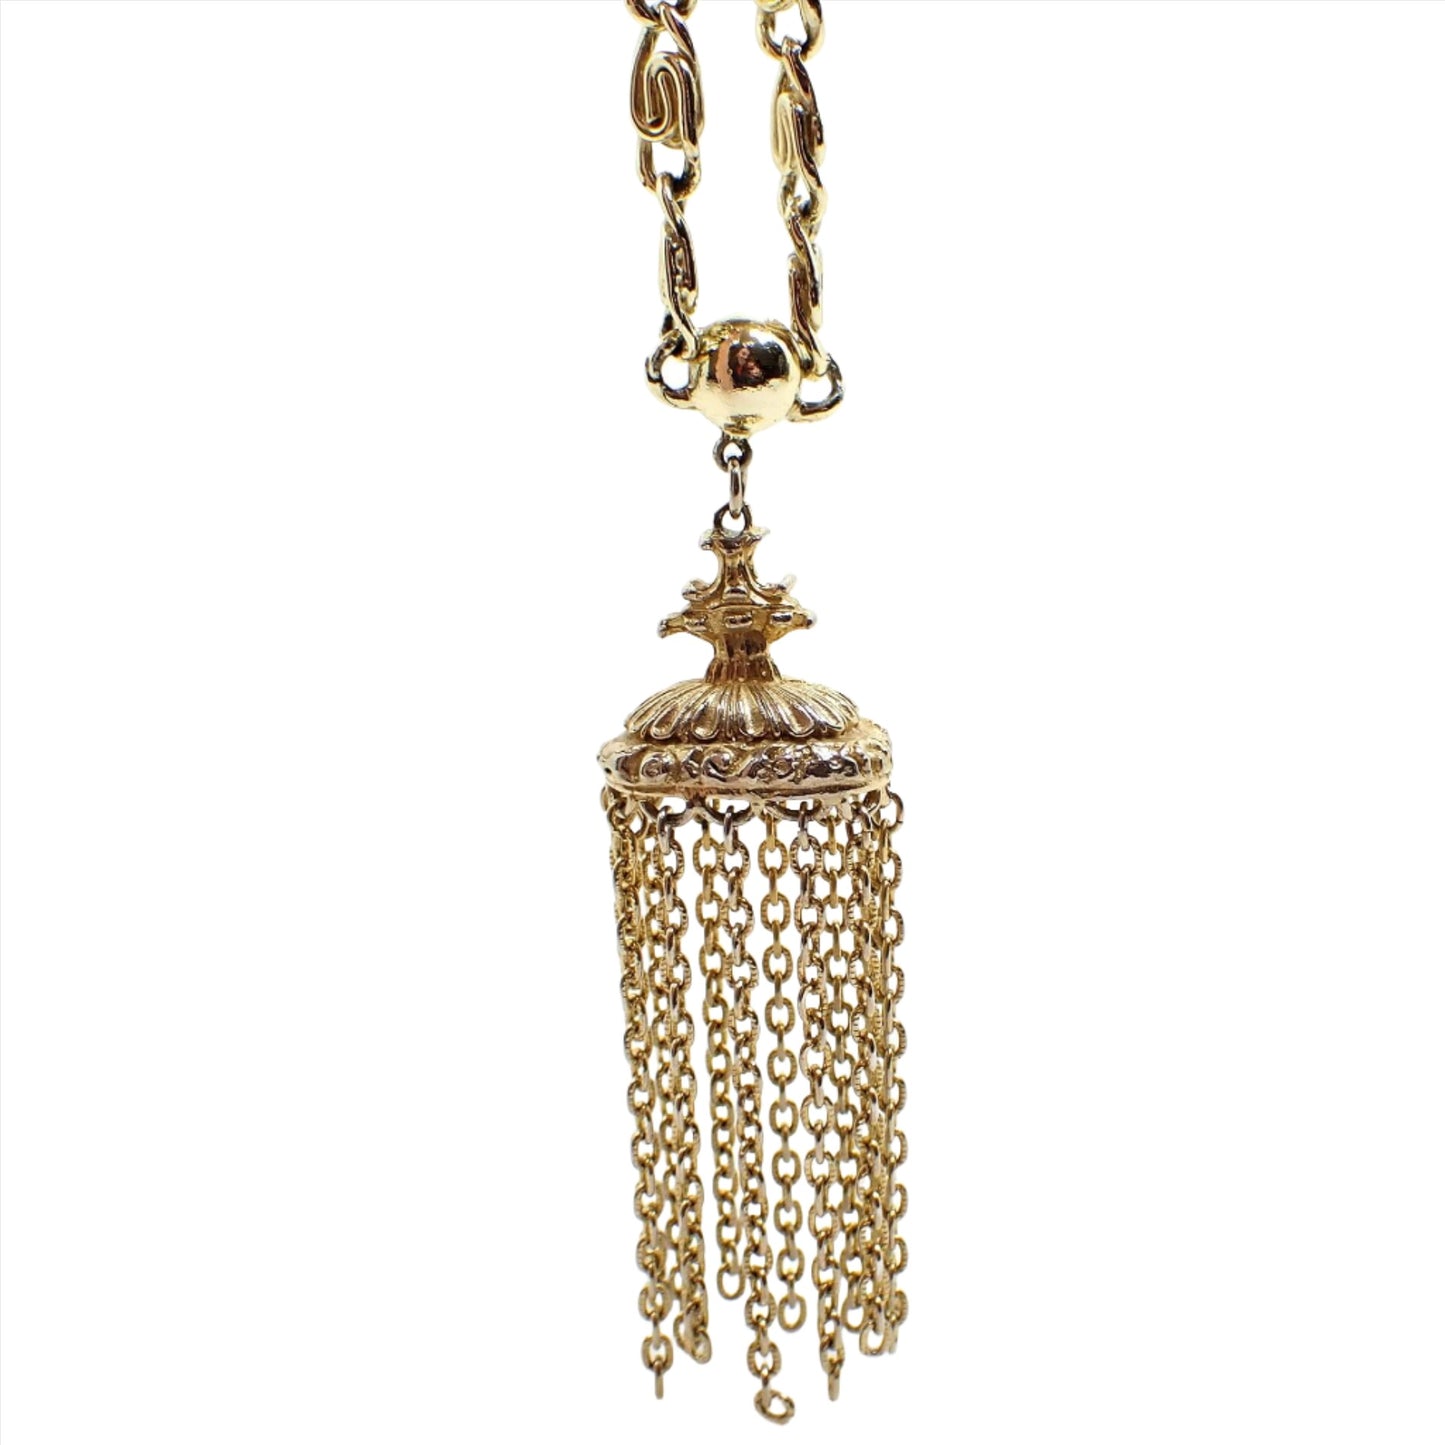 Enlarged front view of the pendant area on the Mid Century vintage chain tassel pendant necklace. The metal color is gold tone. The chain has large S links. The bottom pendant has a crest style top with a large oval that has strands of cable chain all the way around it. 